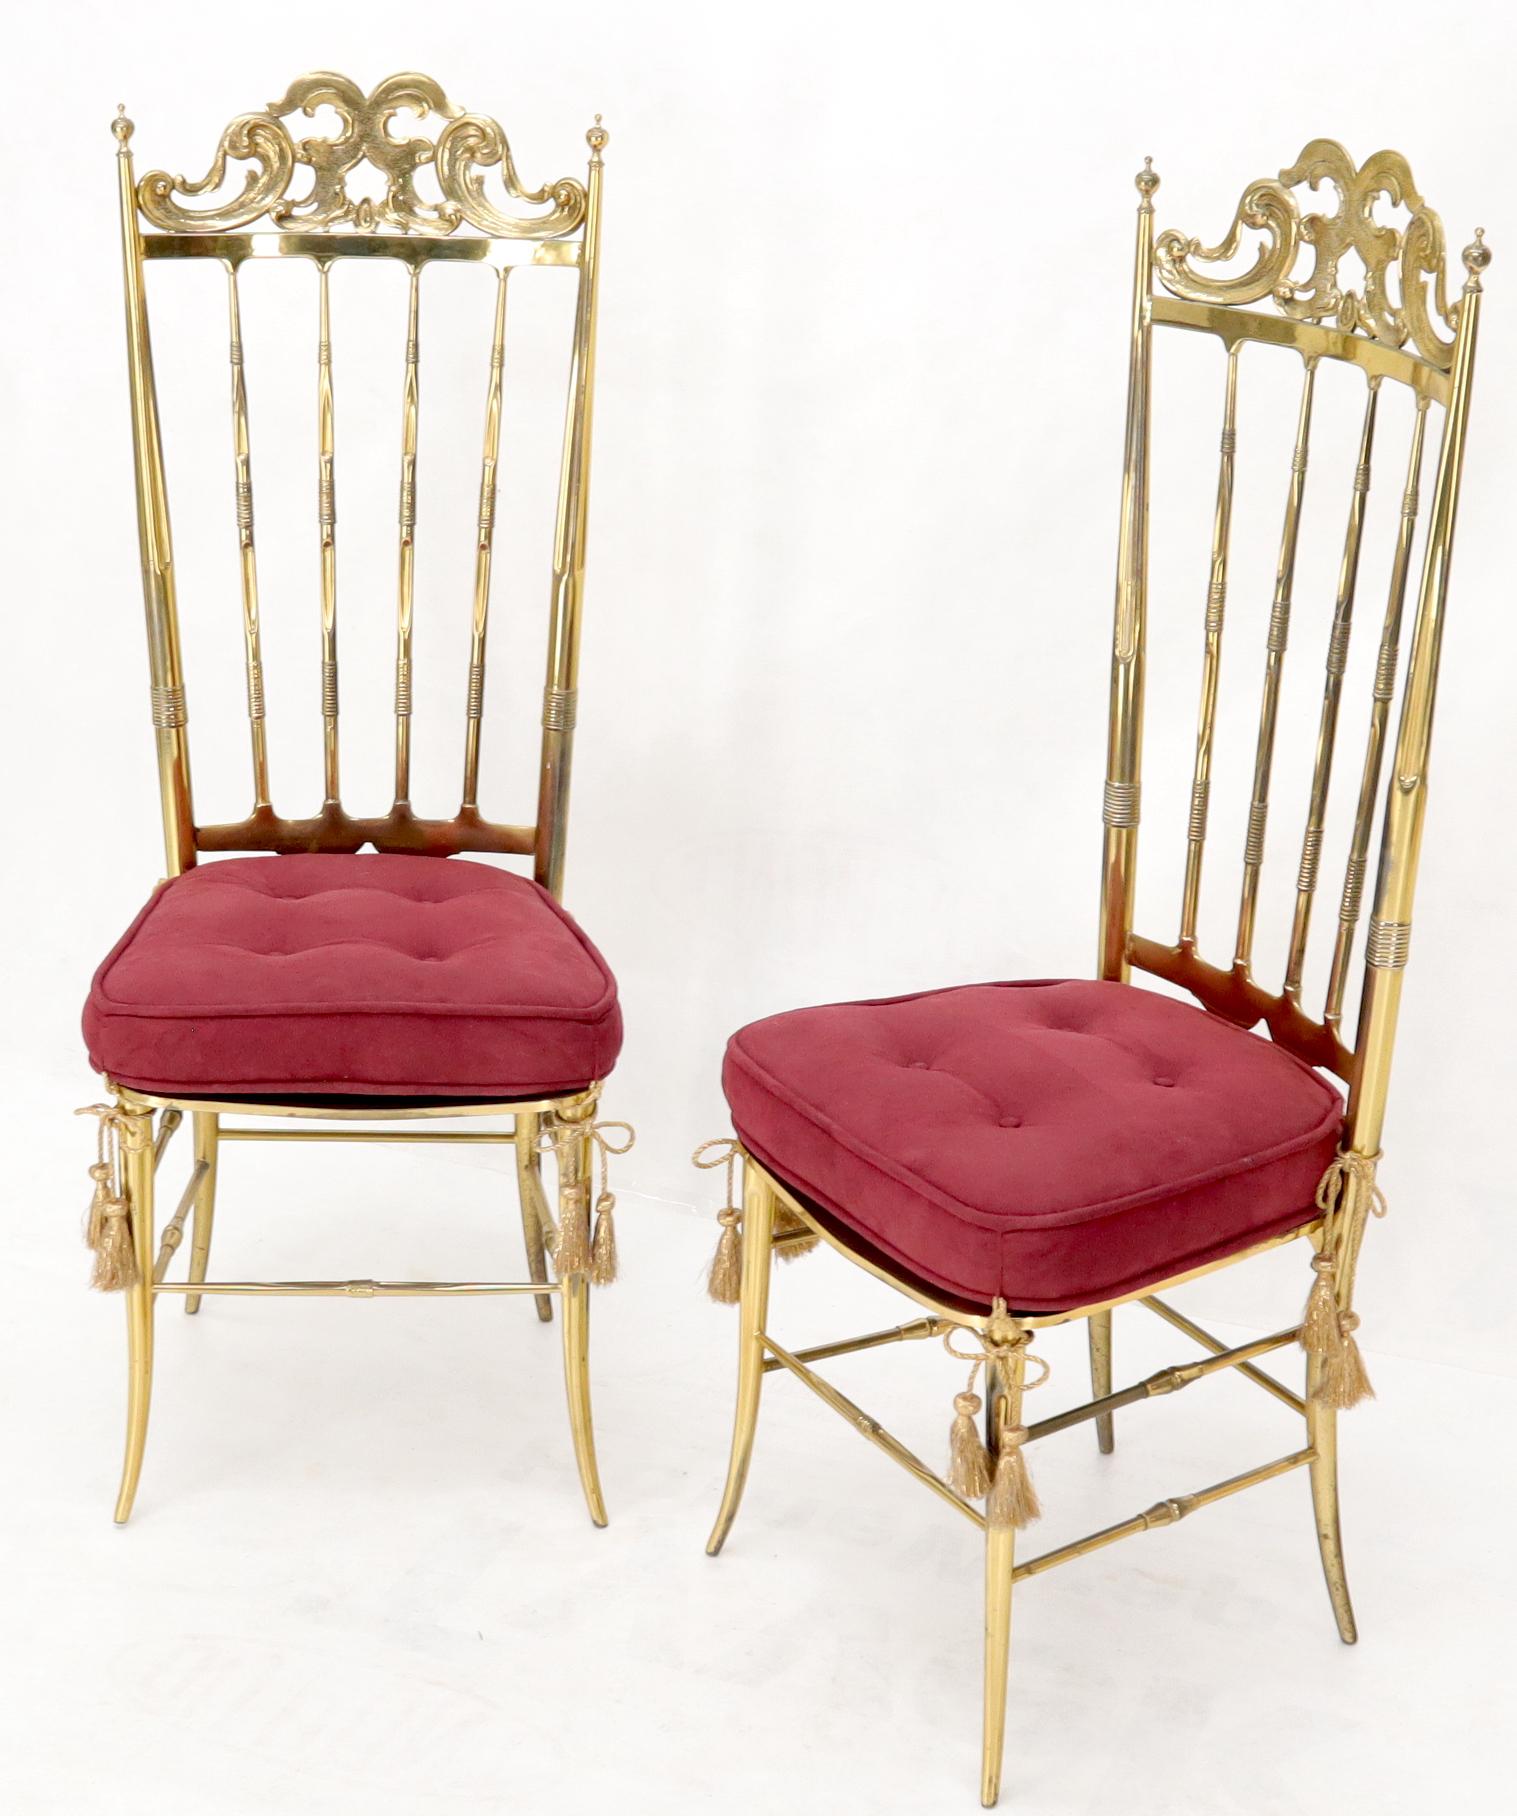 Set of two solid brass Italian Chiavari dining chairs with tall backs.